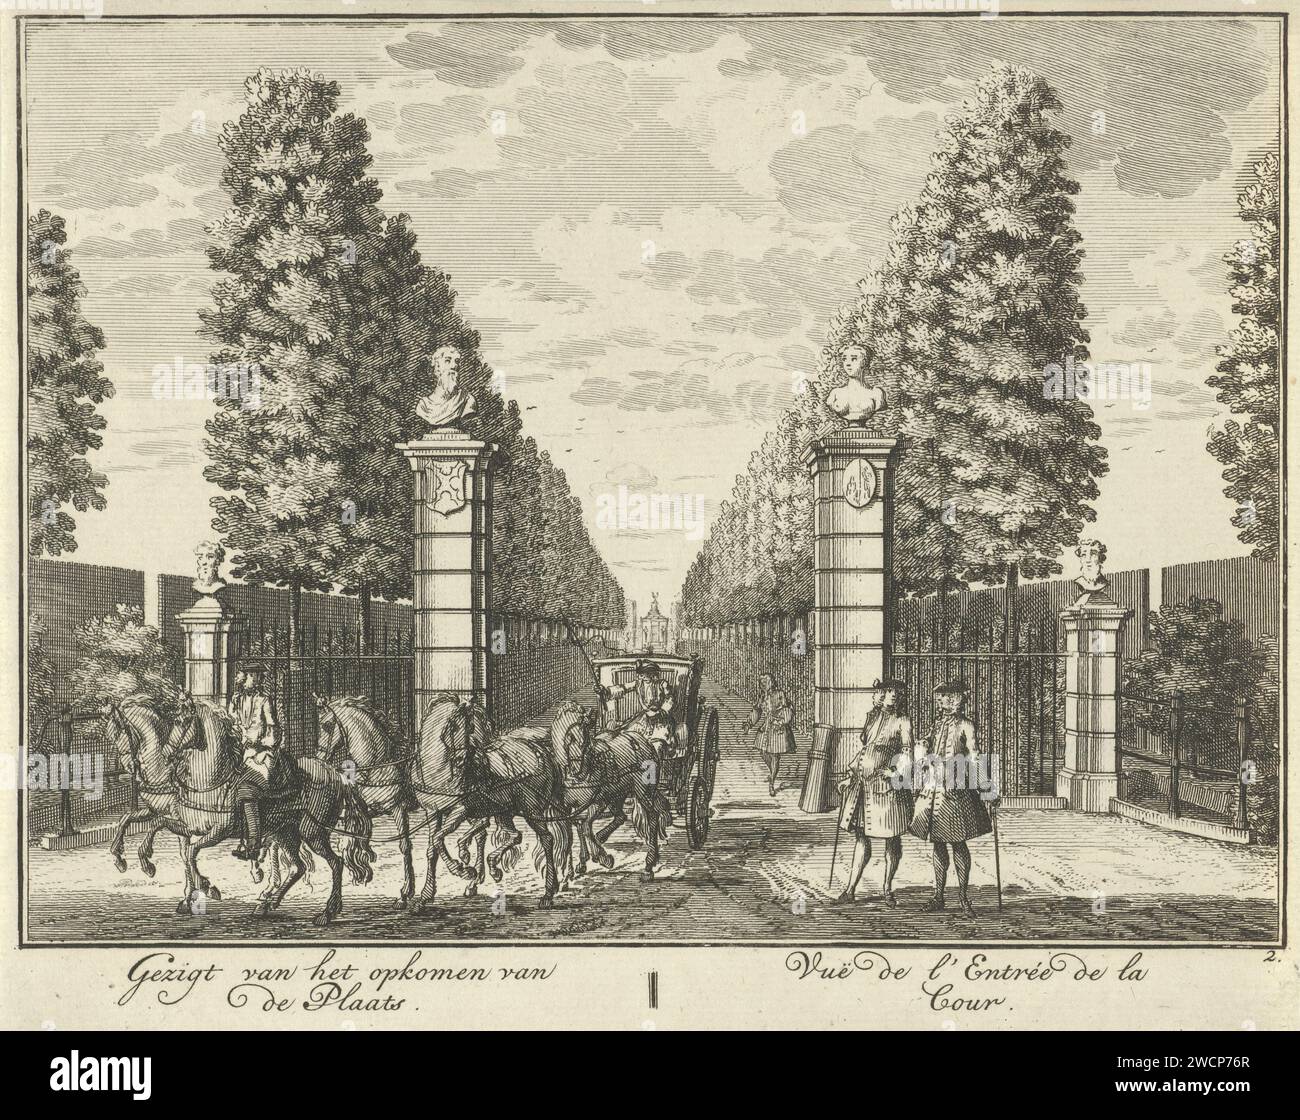 Access gateway to Huis ter Meer in Maarssen, Hendrik de Leth, c. 1740 print Face through the entrance gate of Huis ter Meer in Maarssen with a carriage pulled through six horses in the foreground. The print is part of a series with 26 faces at Huis ter Meer and the accompanying estate in Maarssen.  paper etching country-house. gate, entrance House Ter Meer Stock Photo